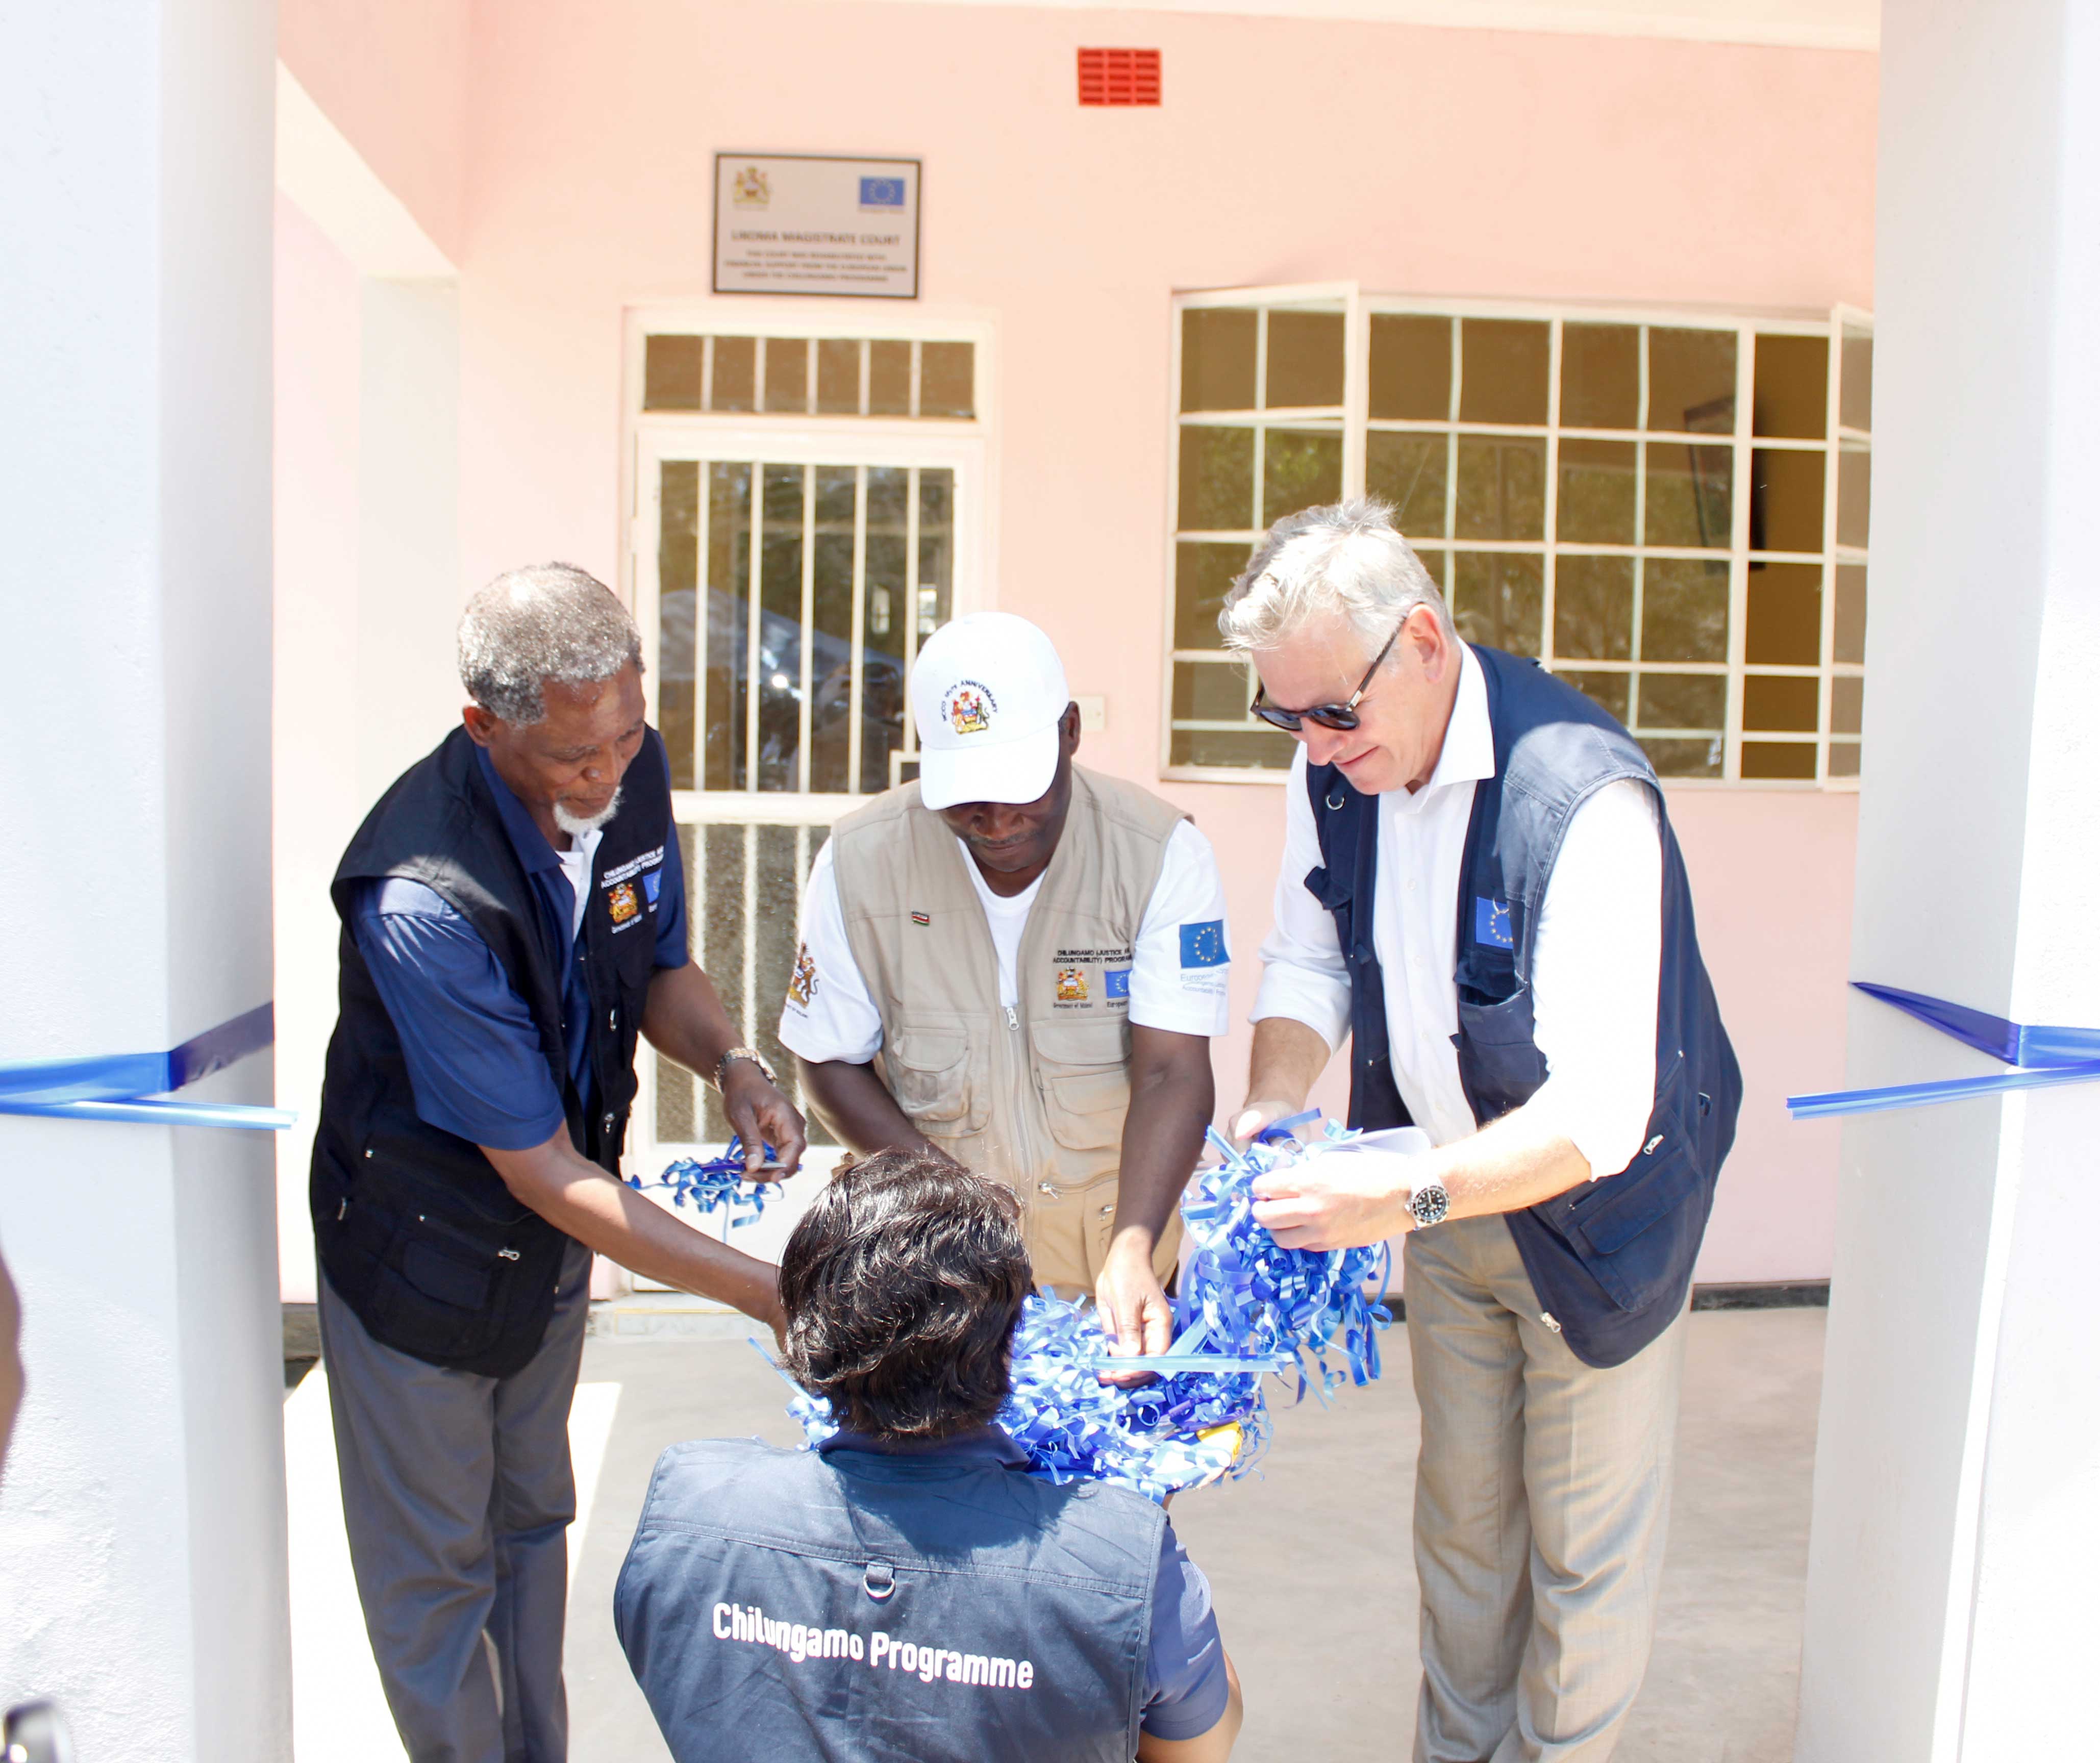 The Official Handover Of The Newly Built Likoma Magistrate Court And Sygmbolic Handover Of The Rehabilitated Balaka And Rumphi District Magistrate Courts